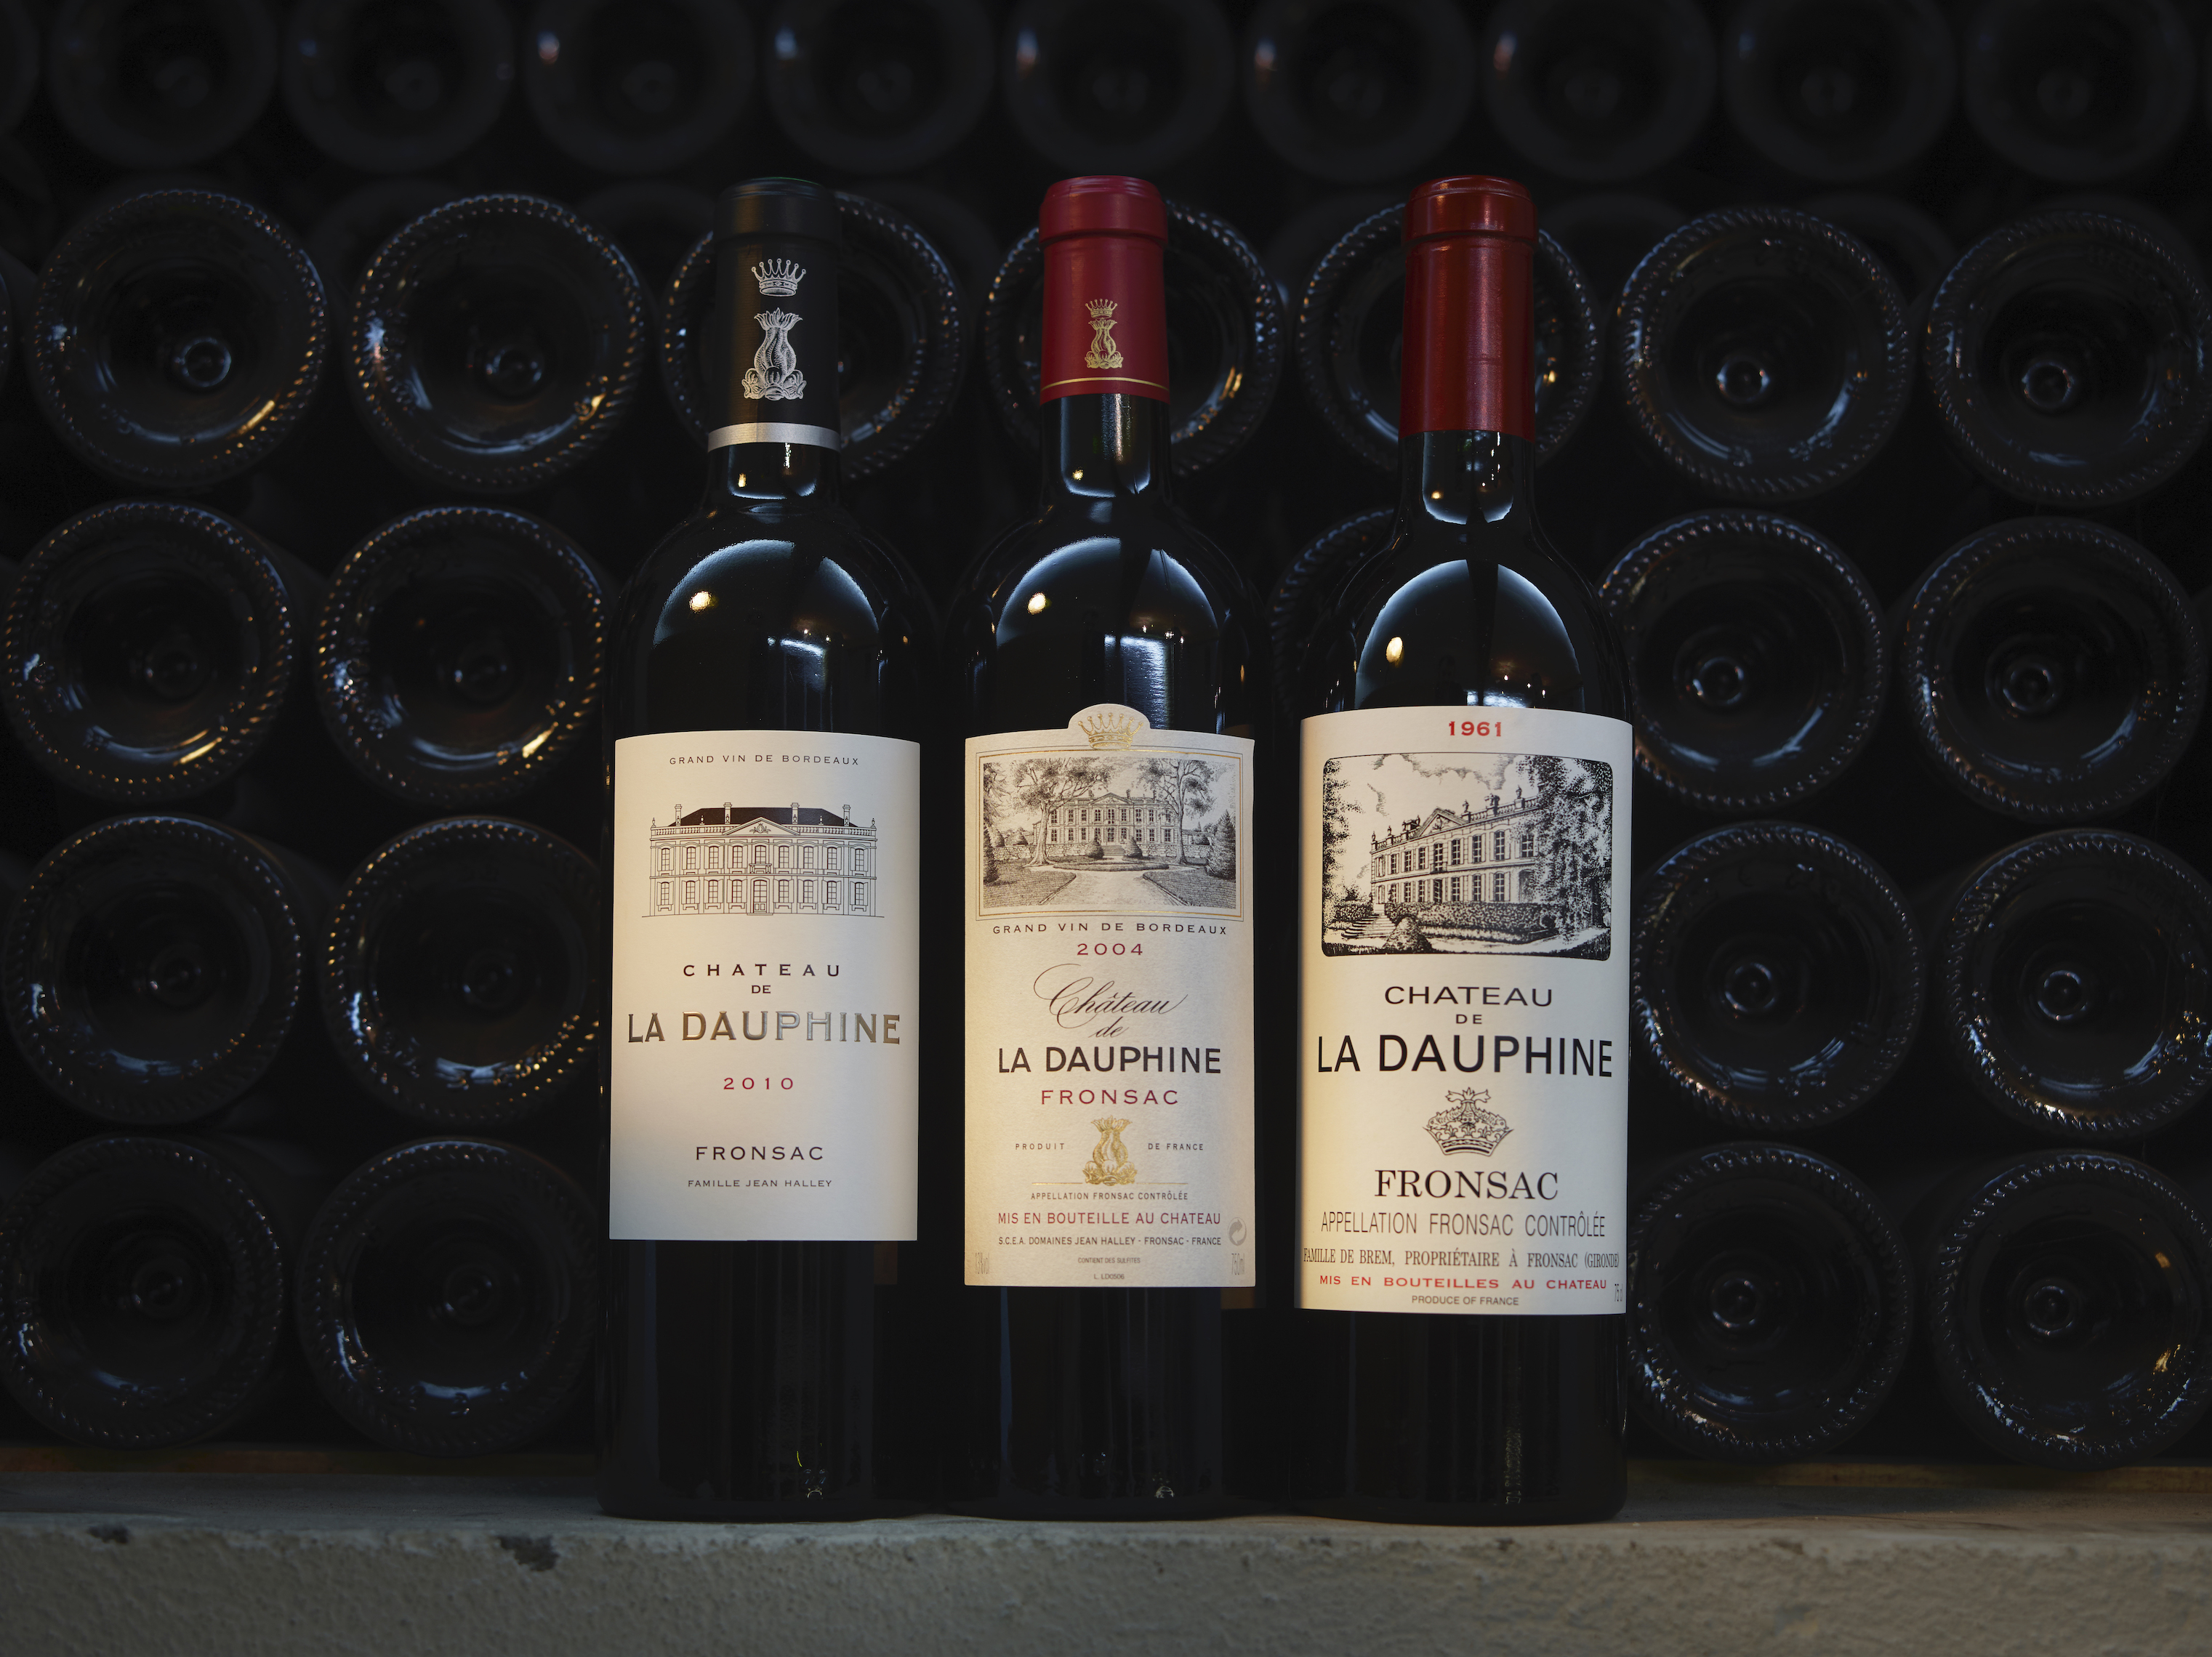 A range of bottles from the cellars @ladauphine